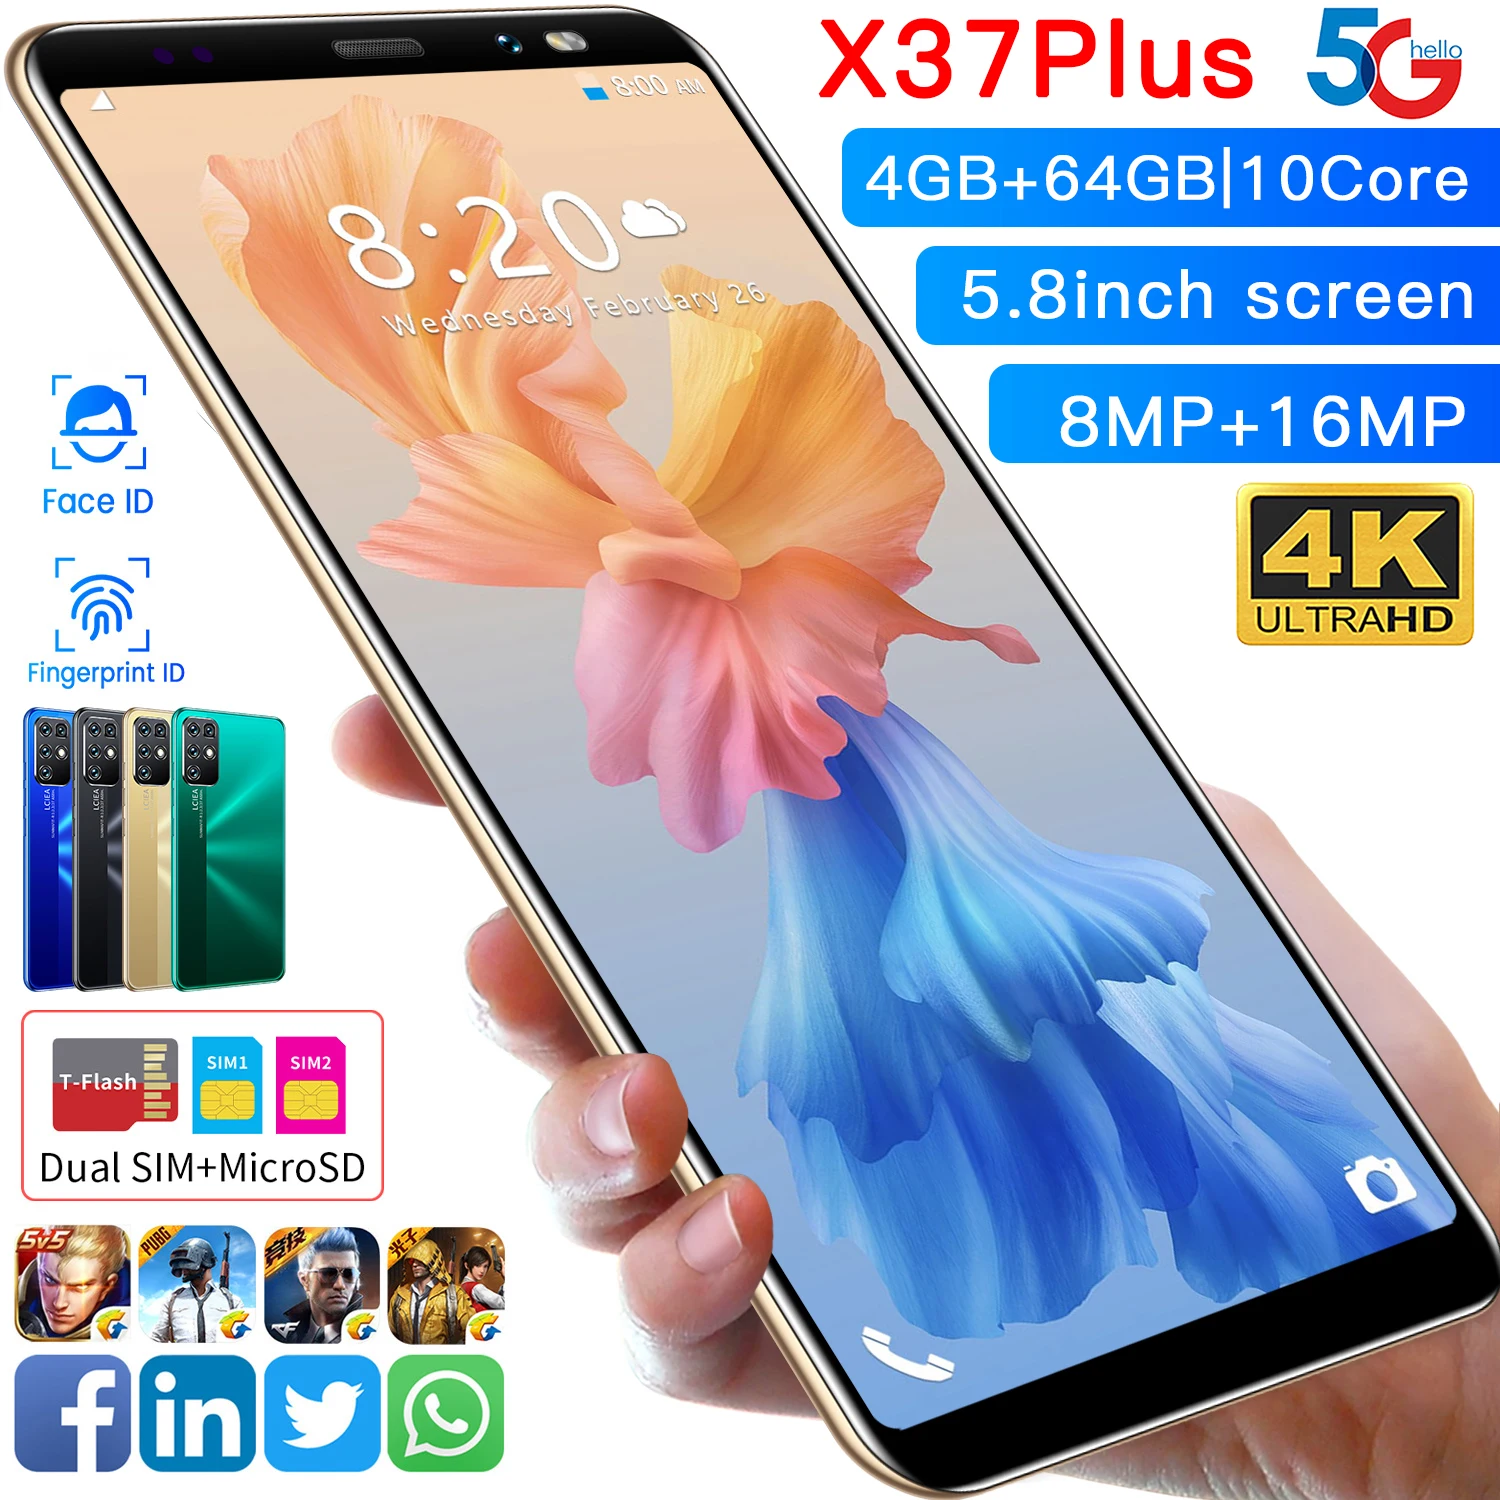 

Hot Sale X37 Plus 4GB+64GB 8MP+16MP Android 10.0 Phone 5G LTE Original 5.8 inch MTK6889 High-end Smartphone